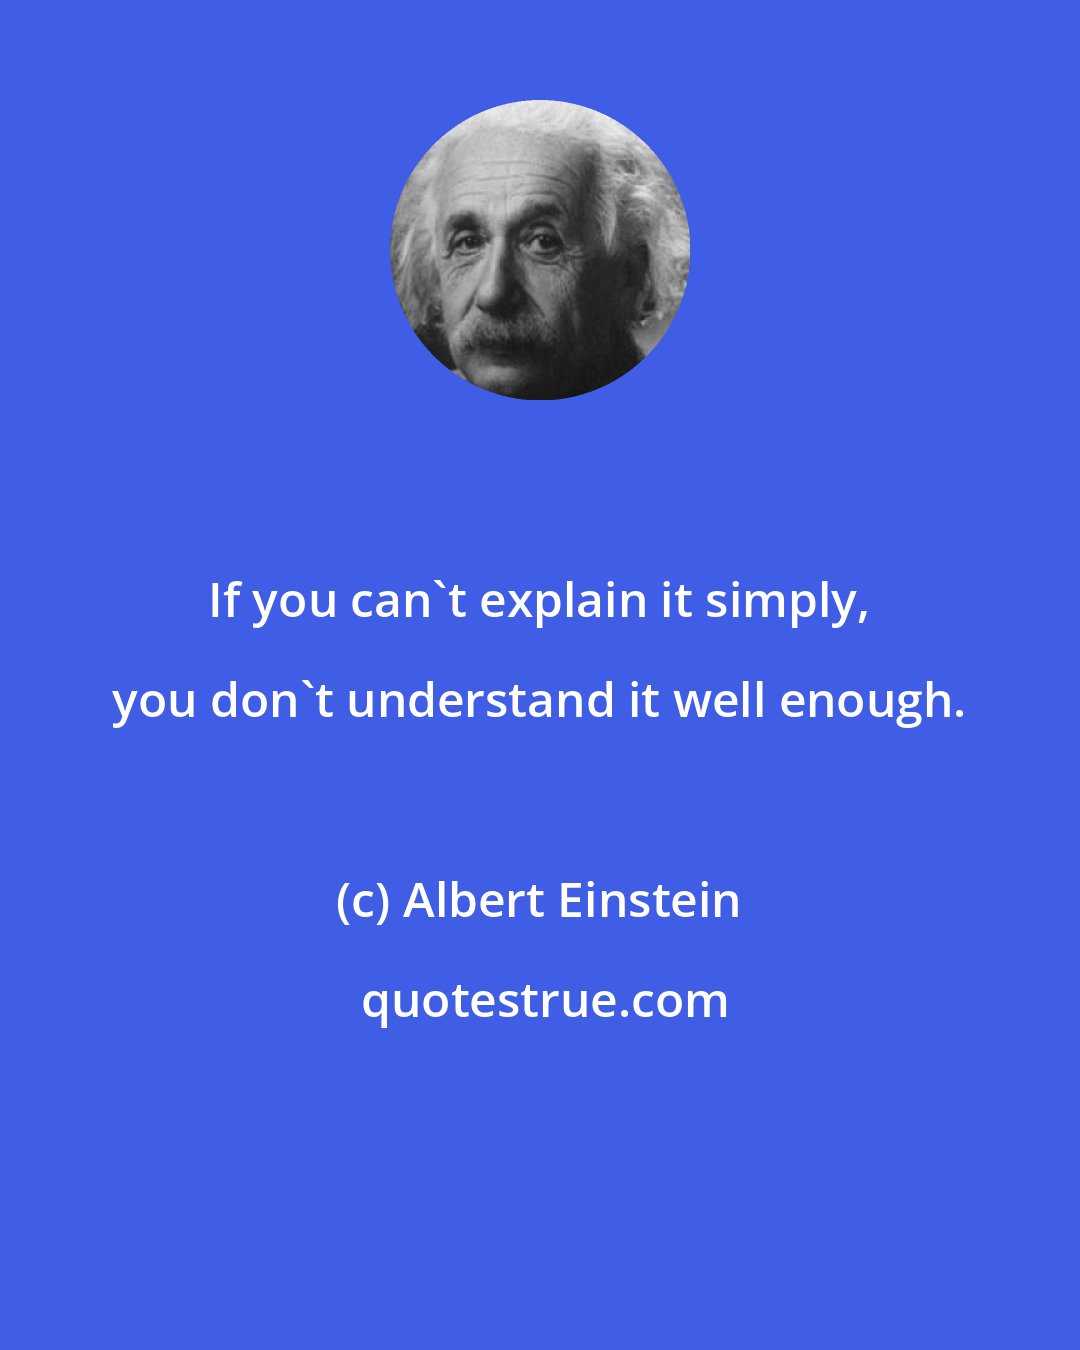 Albert Einstein: If you can't explain it simply, you don't understand it well enough.